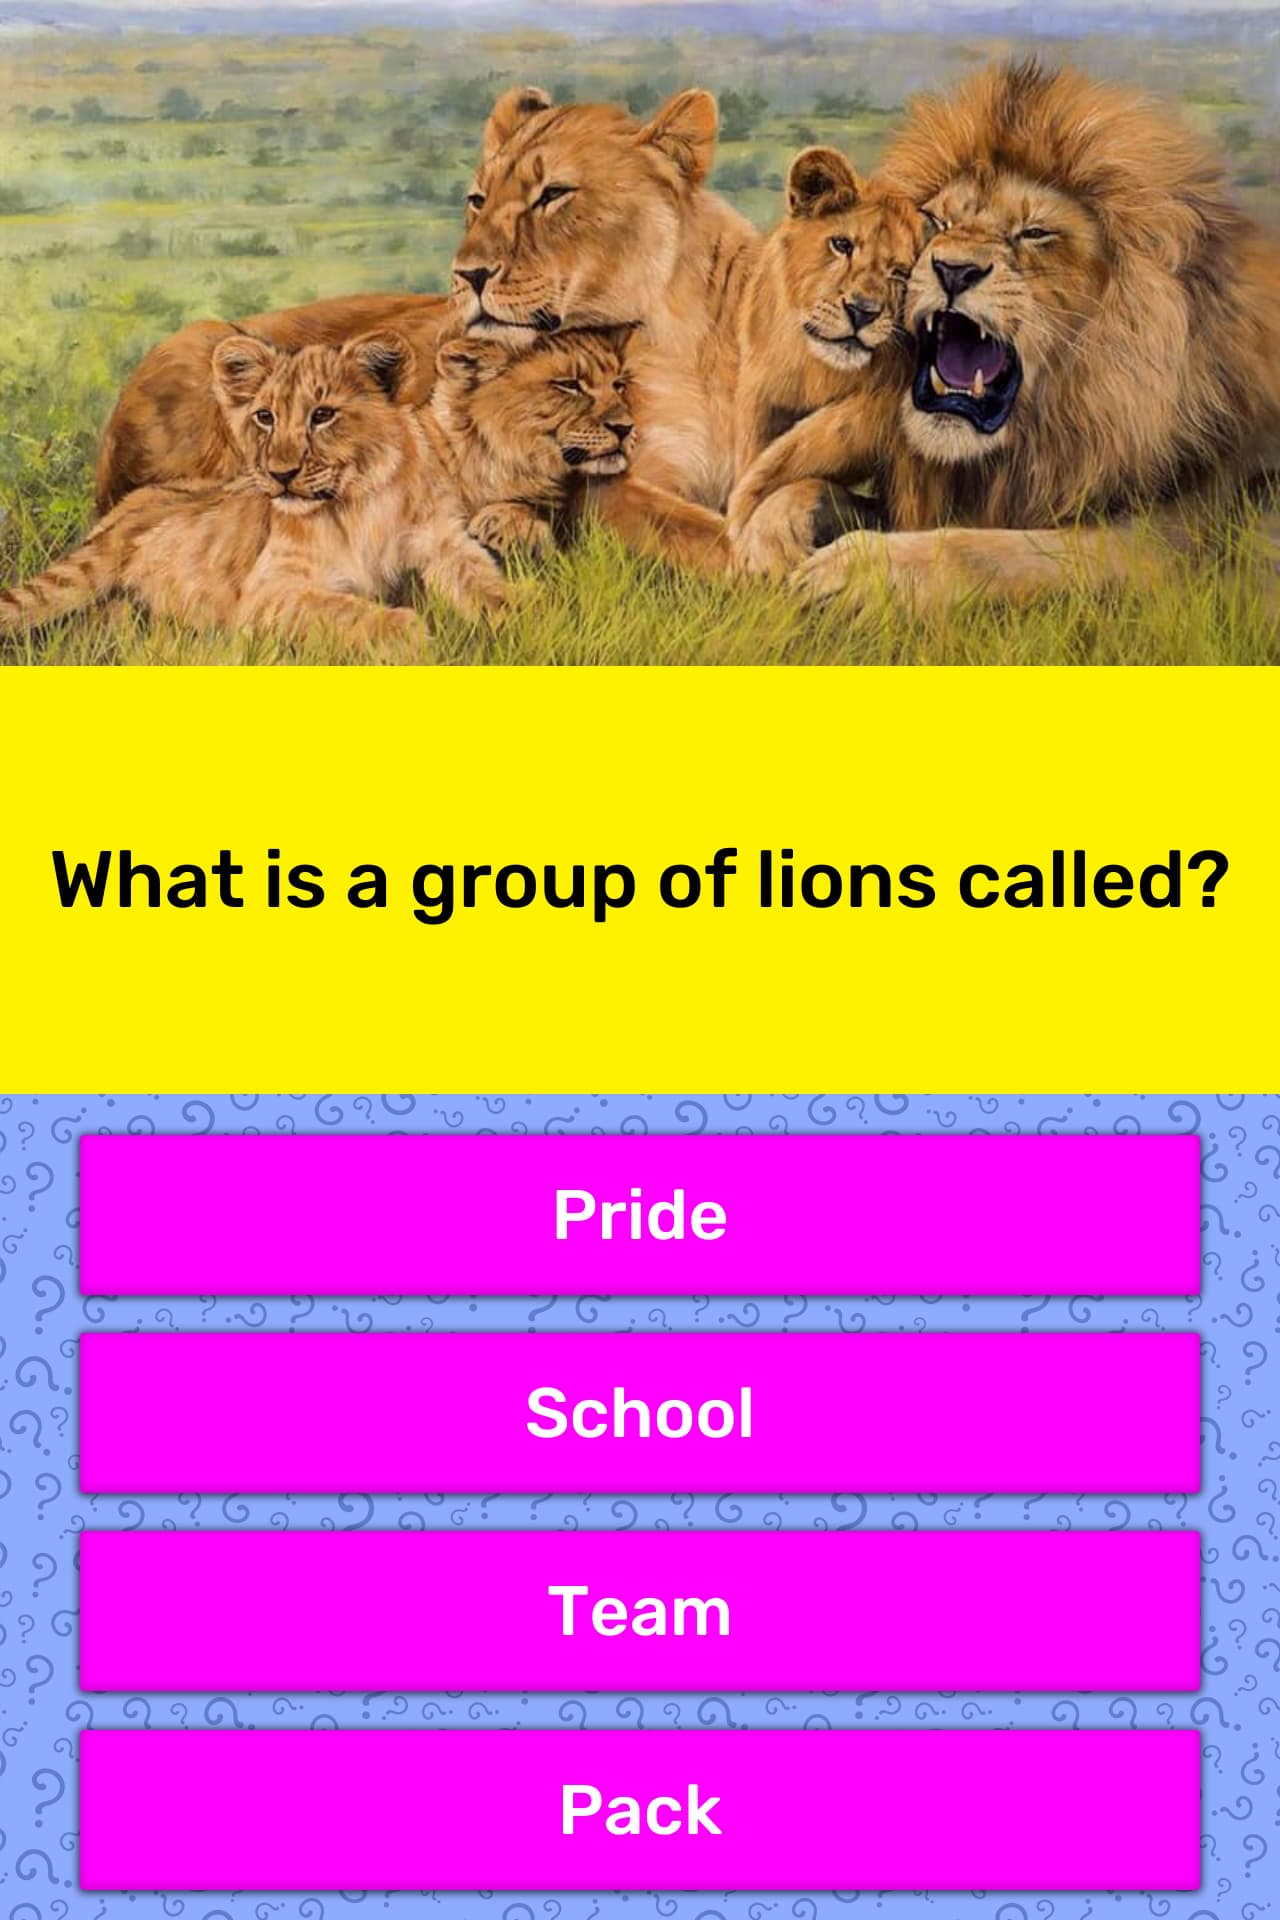 What is a group of lions called?